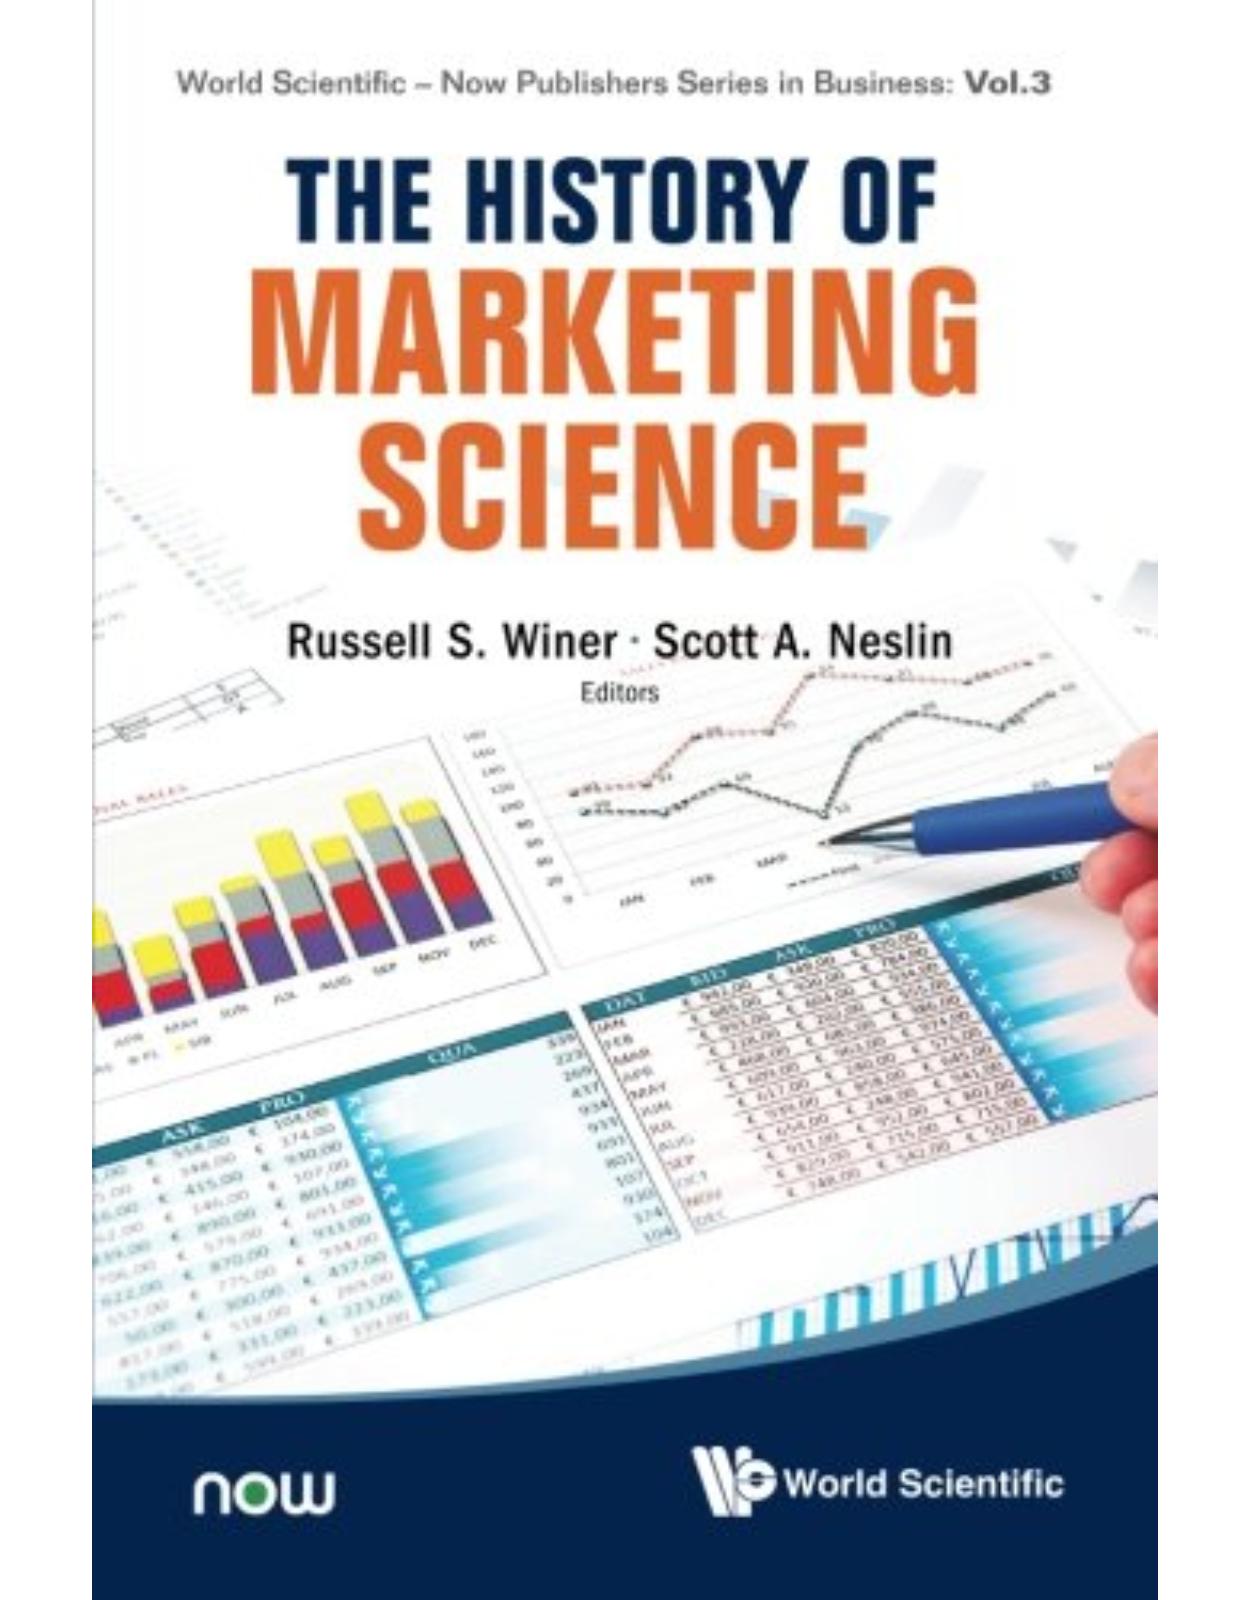 History Of Marketing Science, The (World Scientific-Now Publishers Series in Business)